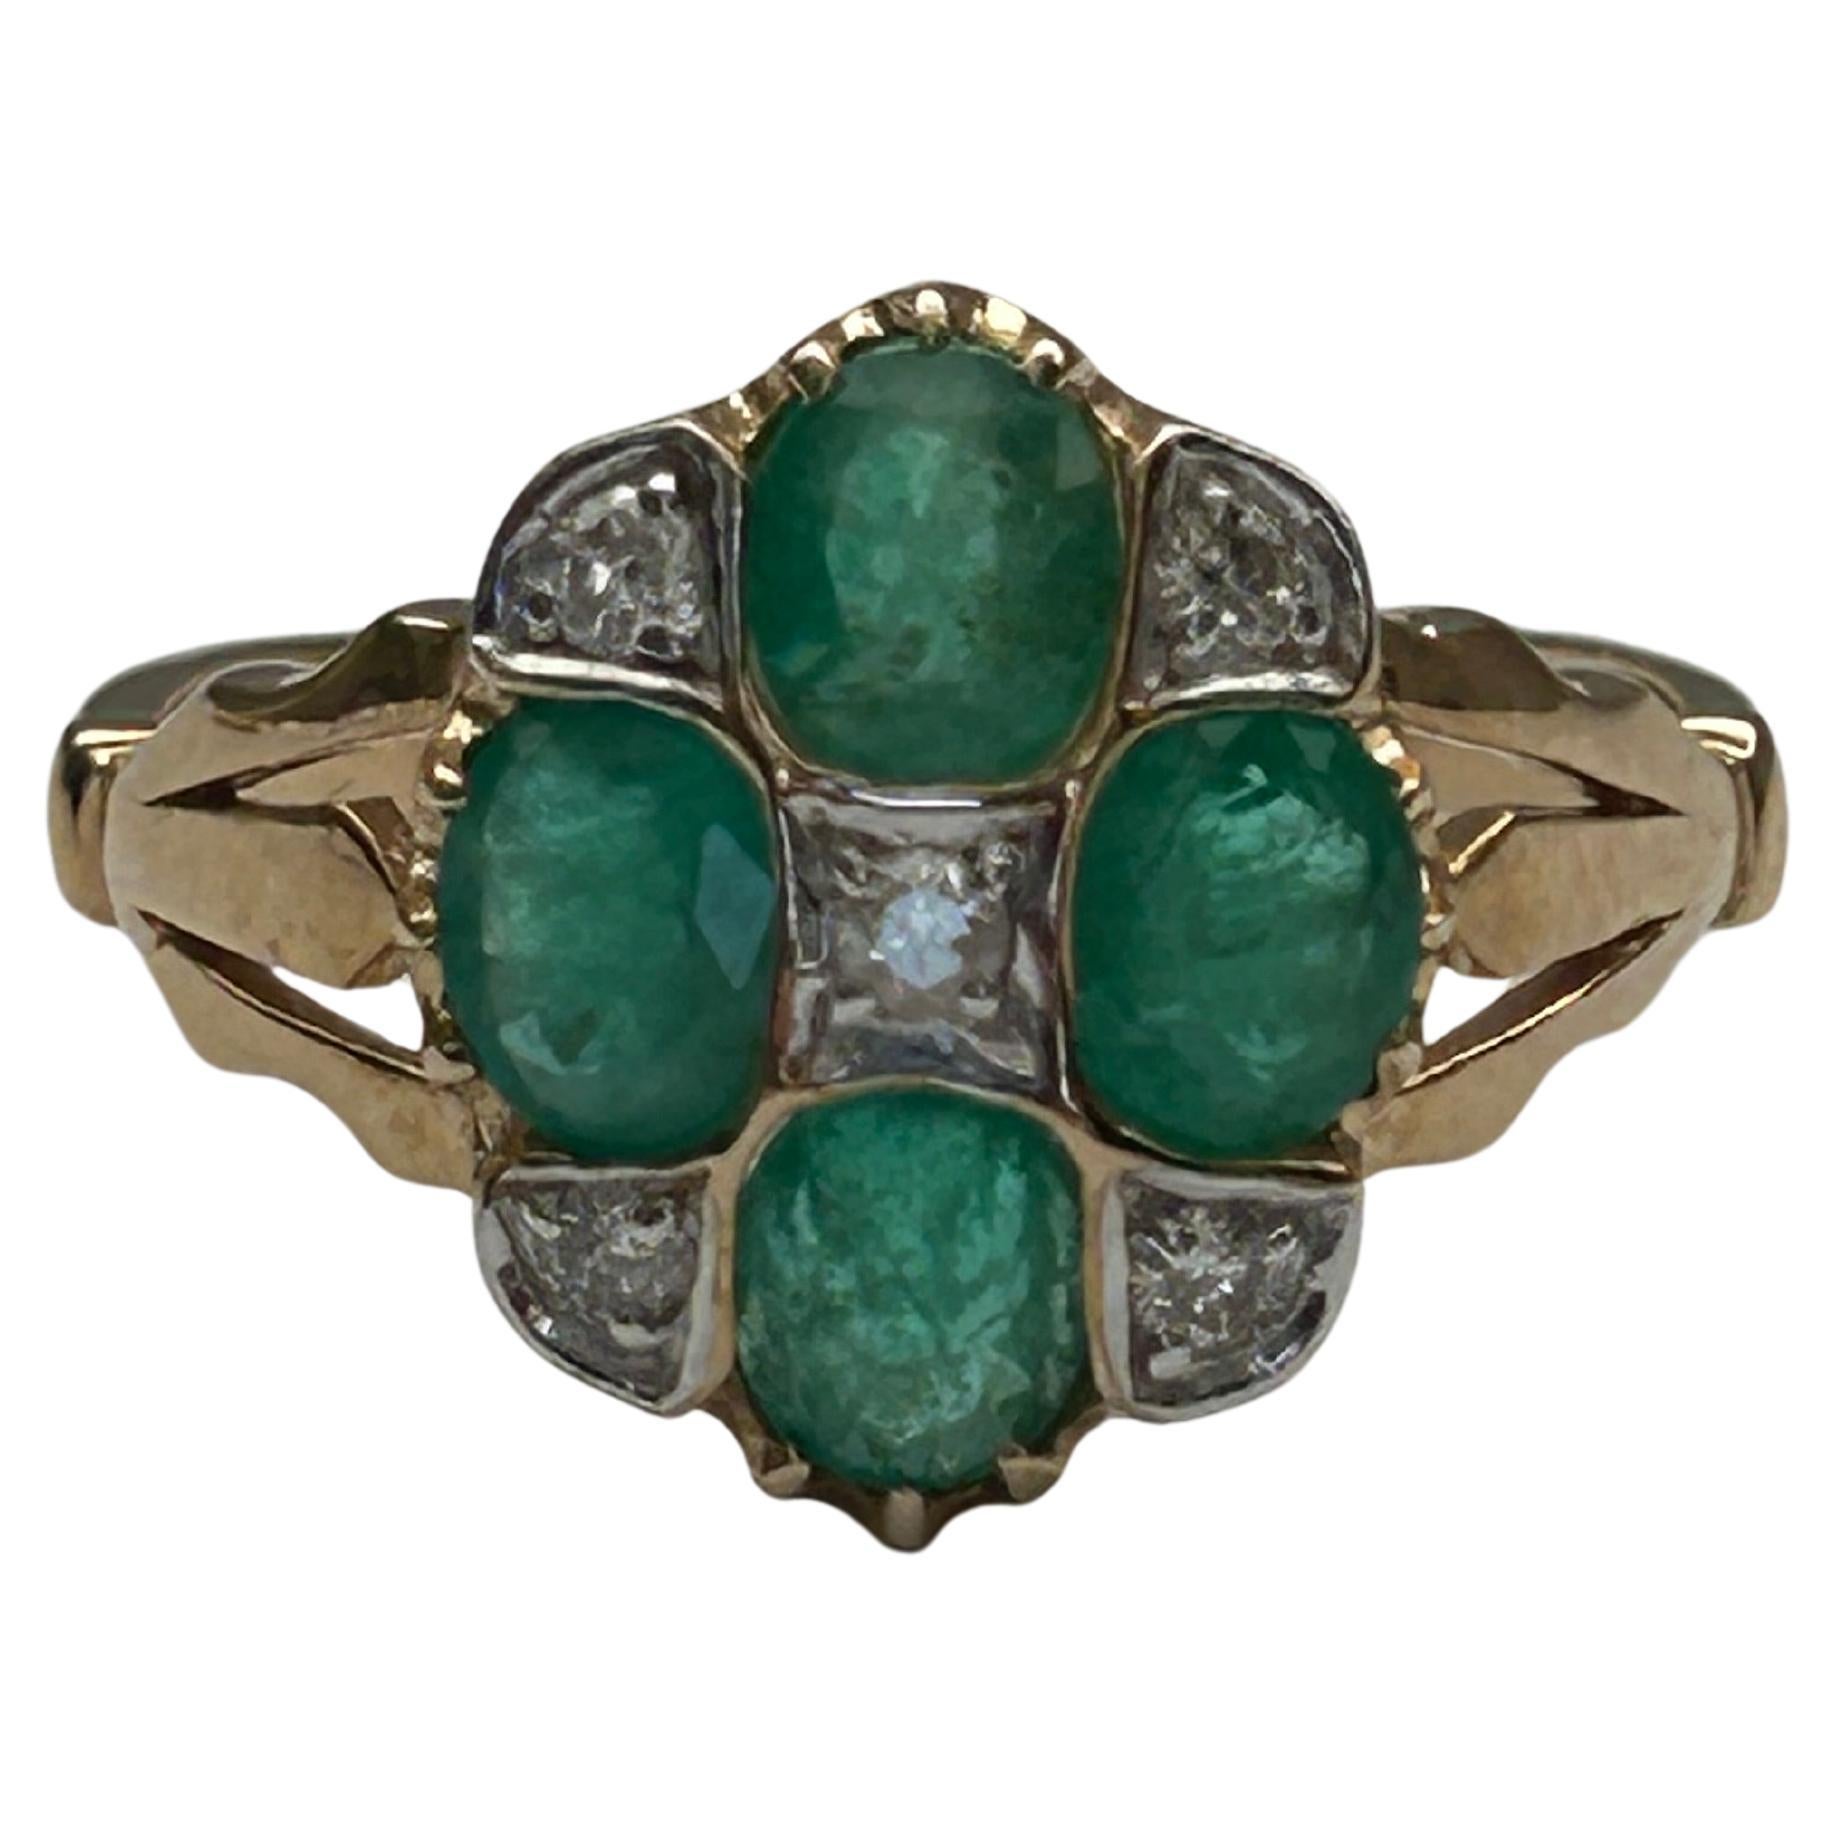 Emerald (Est 1.5ct) & Diamond (Est 0.12ct) Cluster Ring, 9ct Yellow Gold. For Sale